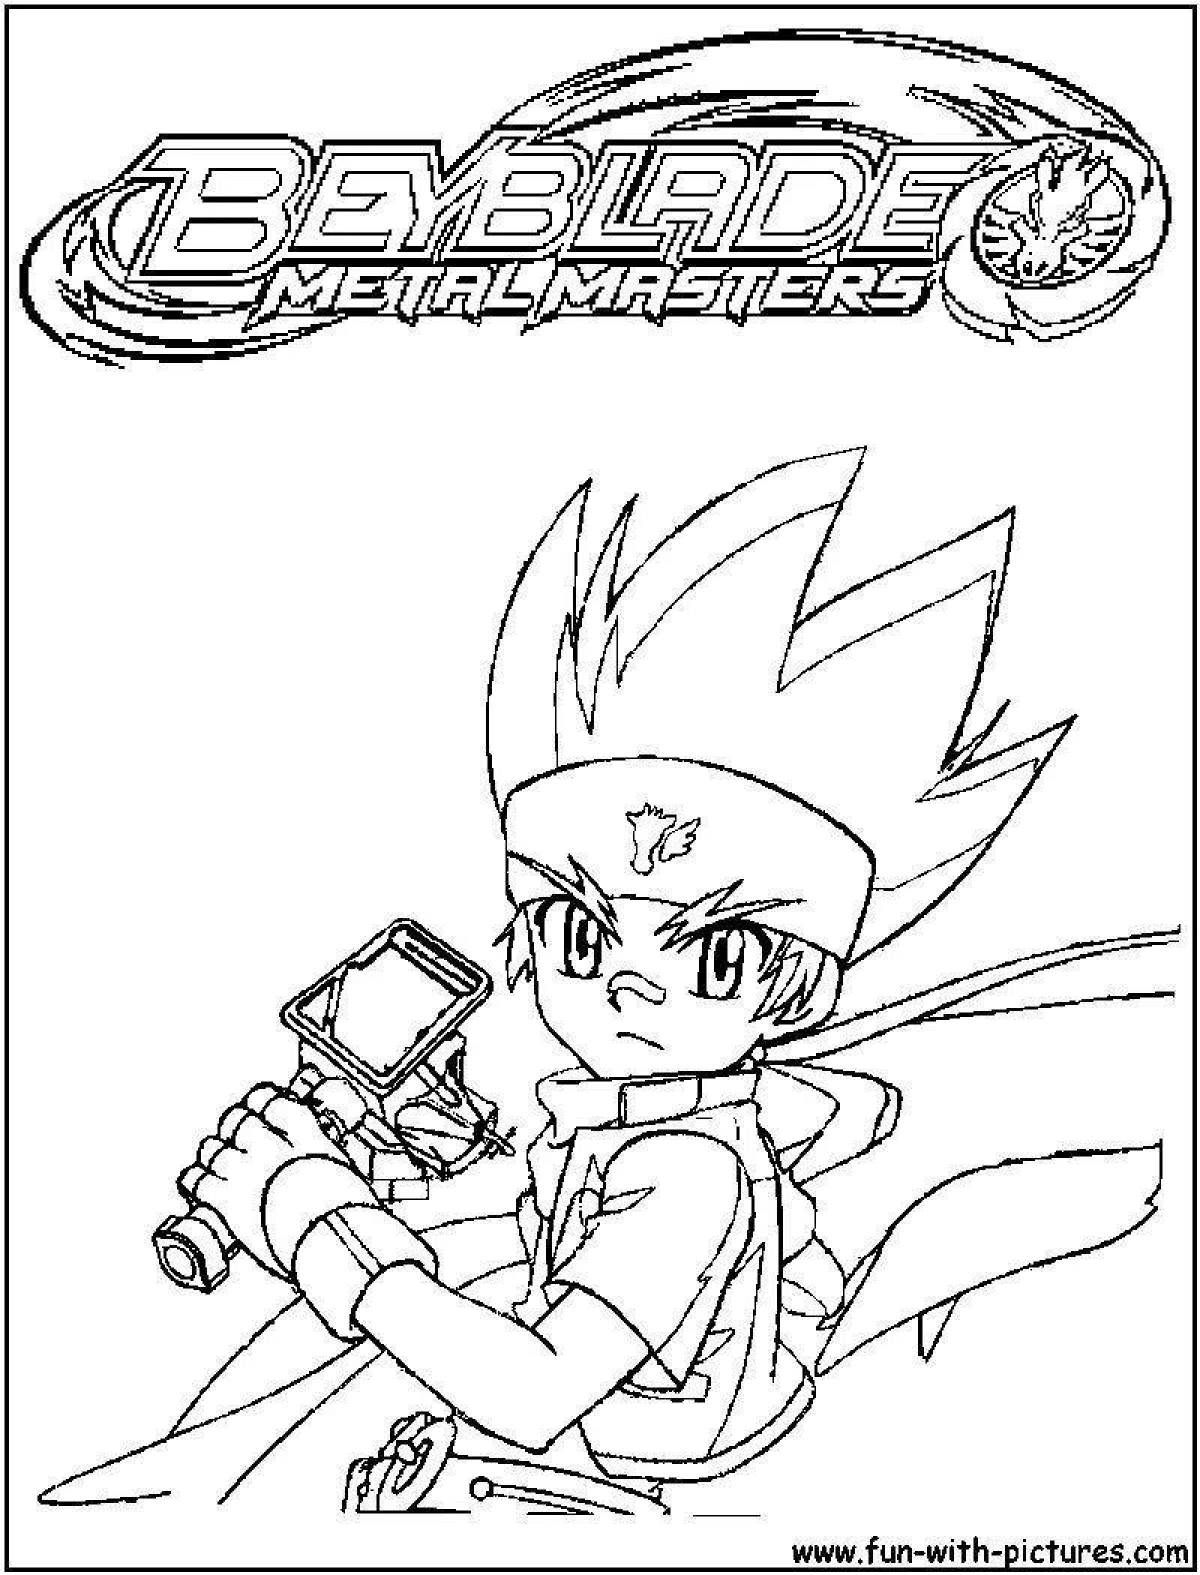 Exciting beyblade burst coloring book